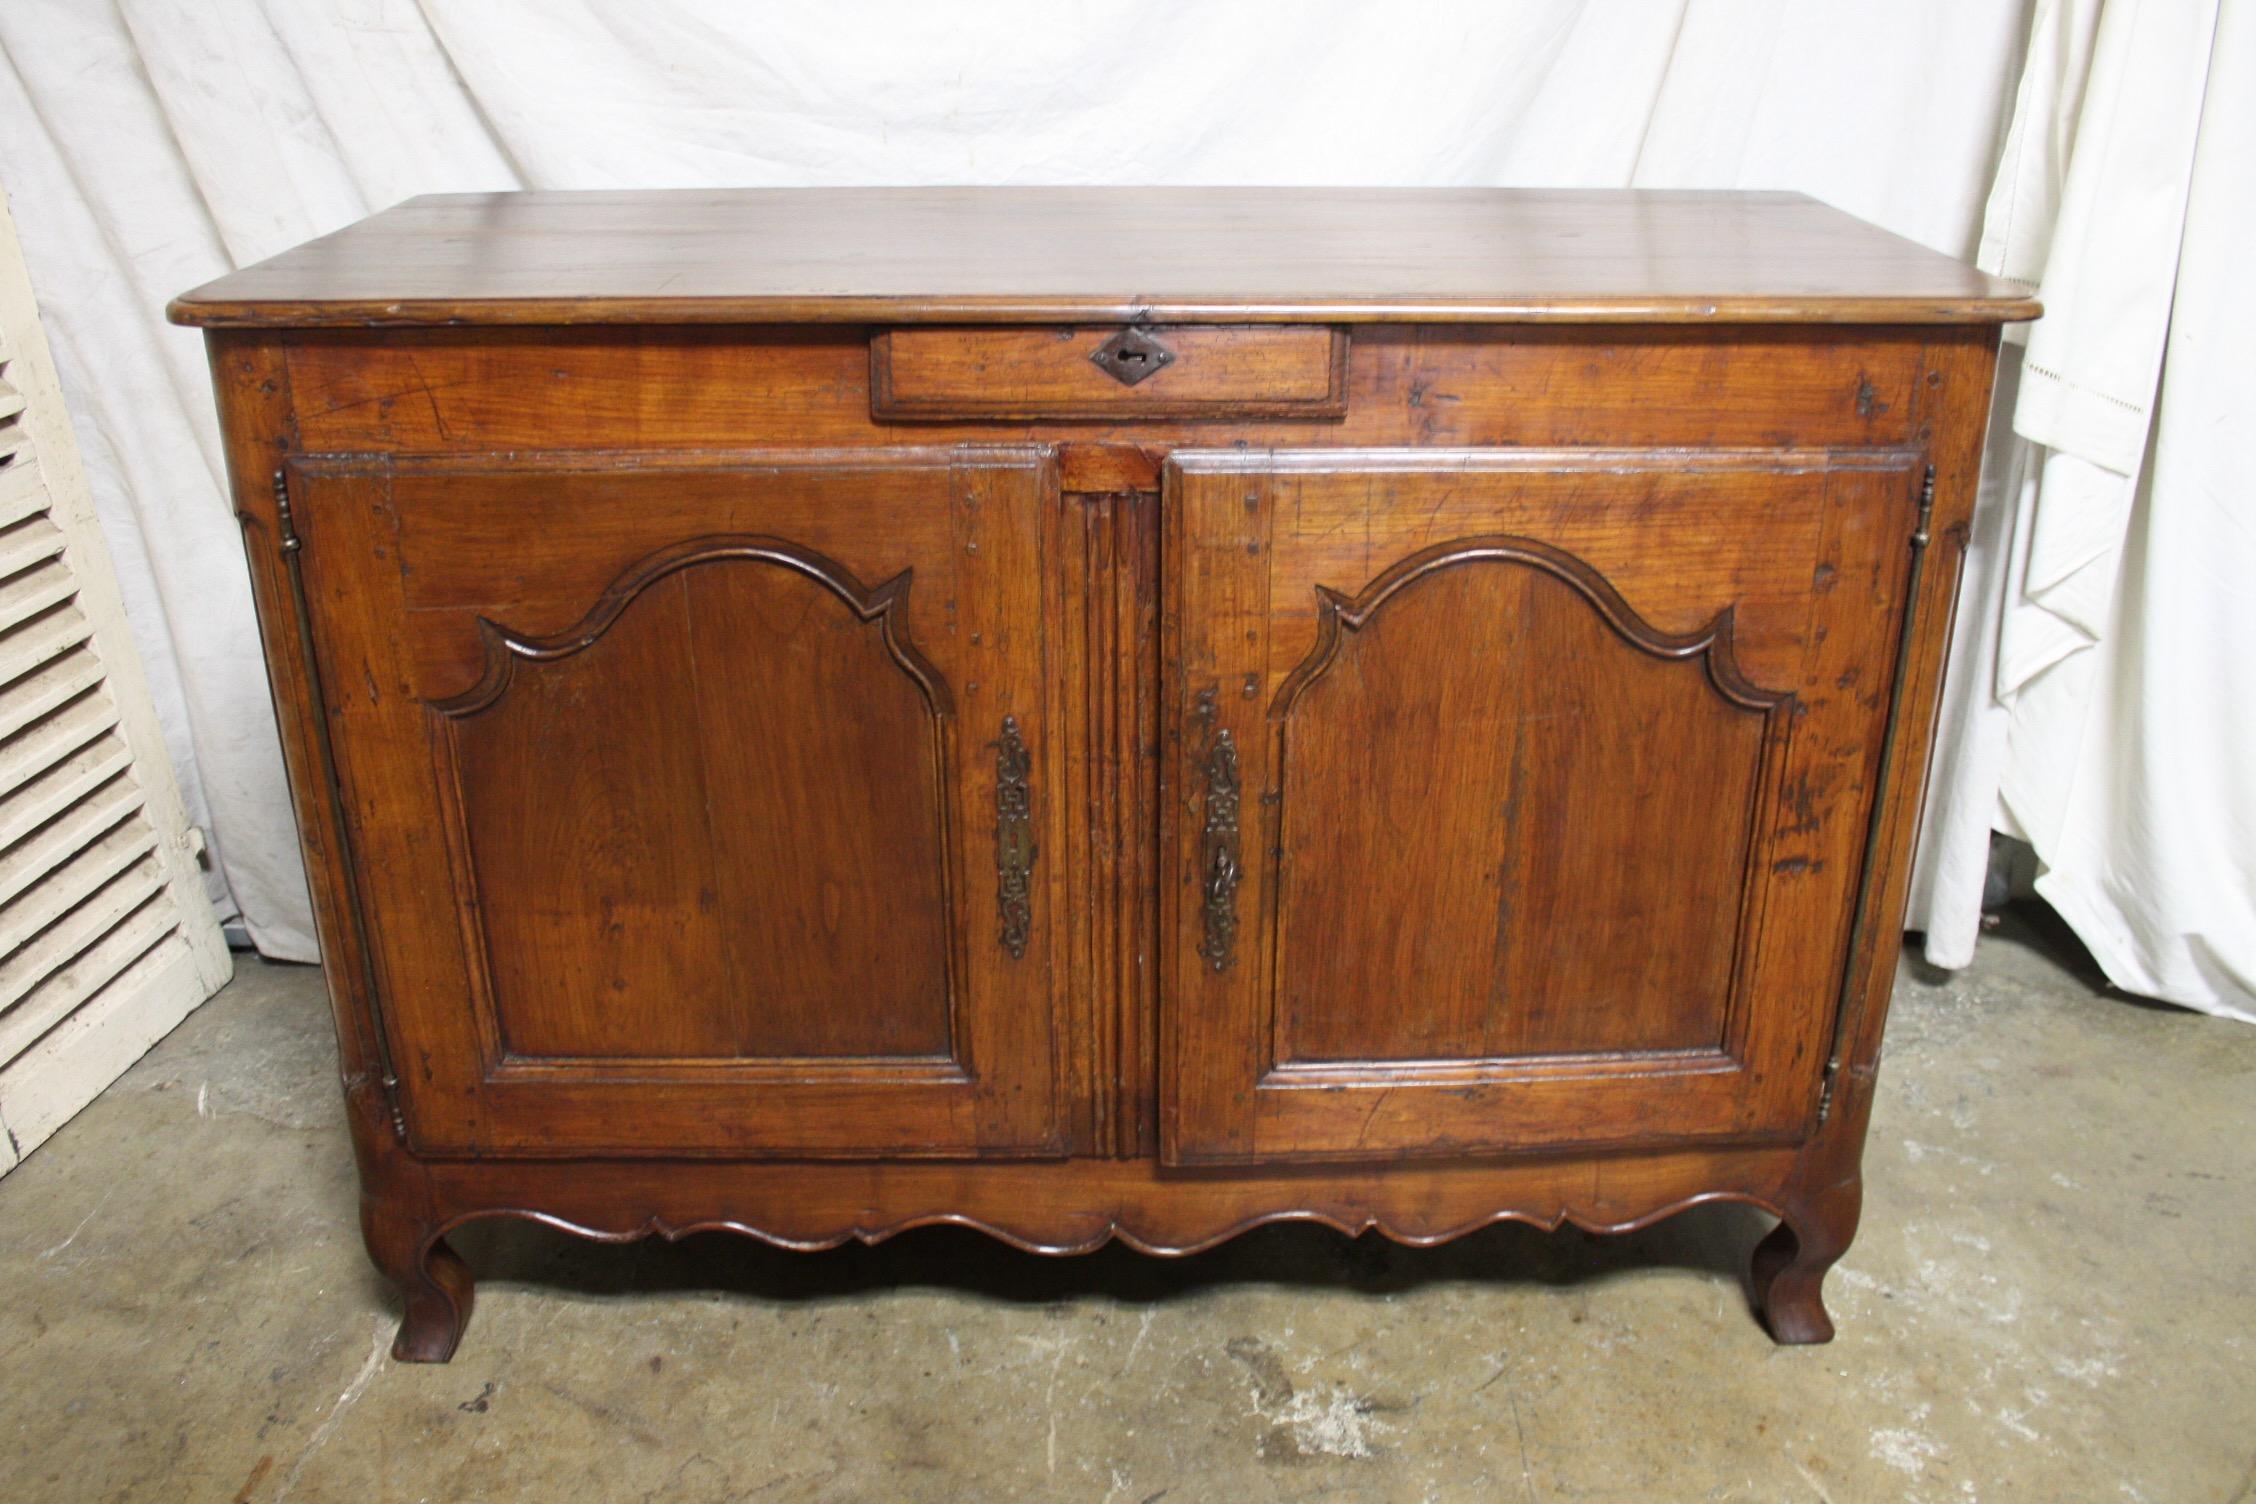 Early French 18th century rustic buffet.